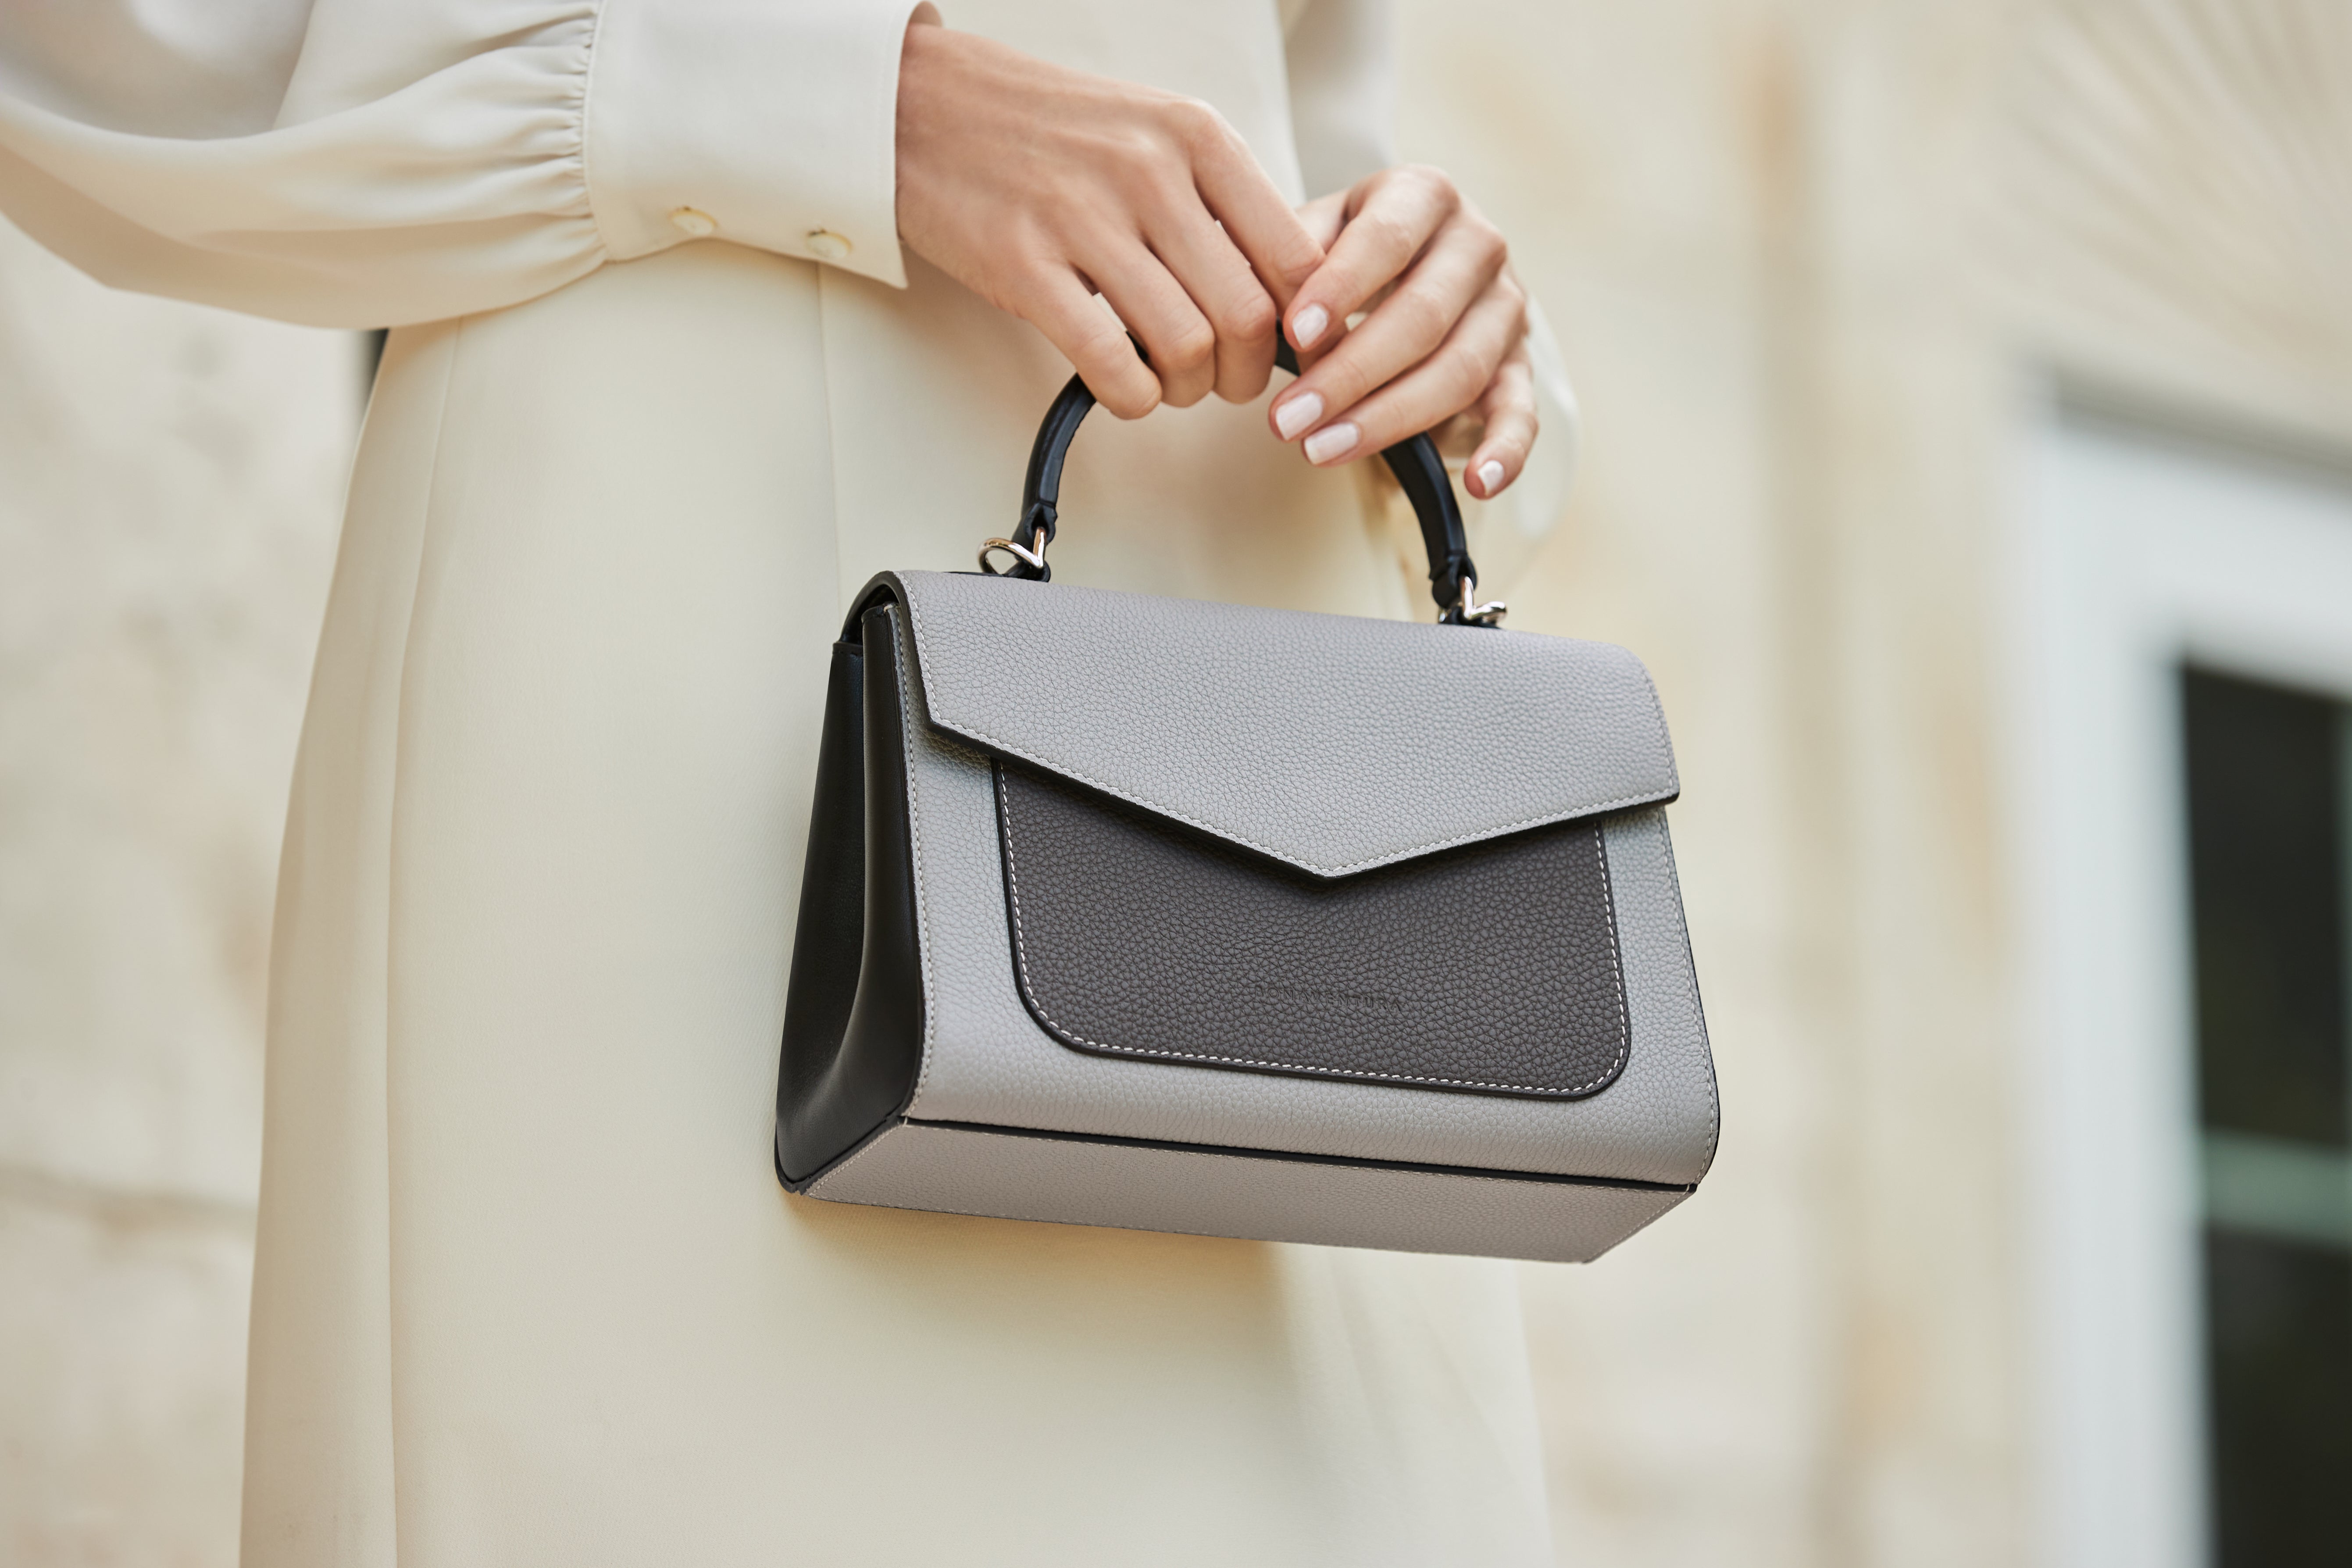 The high-quality Laura bag from BONAVENTURA made of fine Fjord full-grain leather.